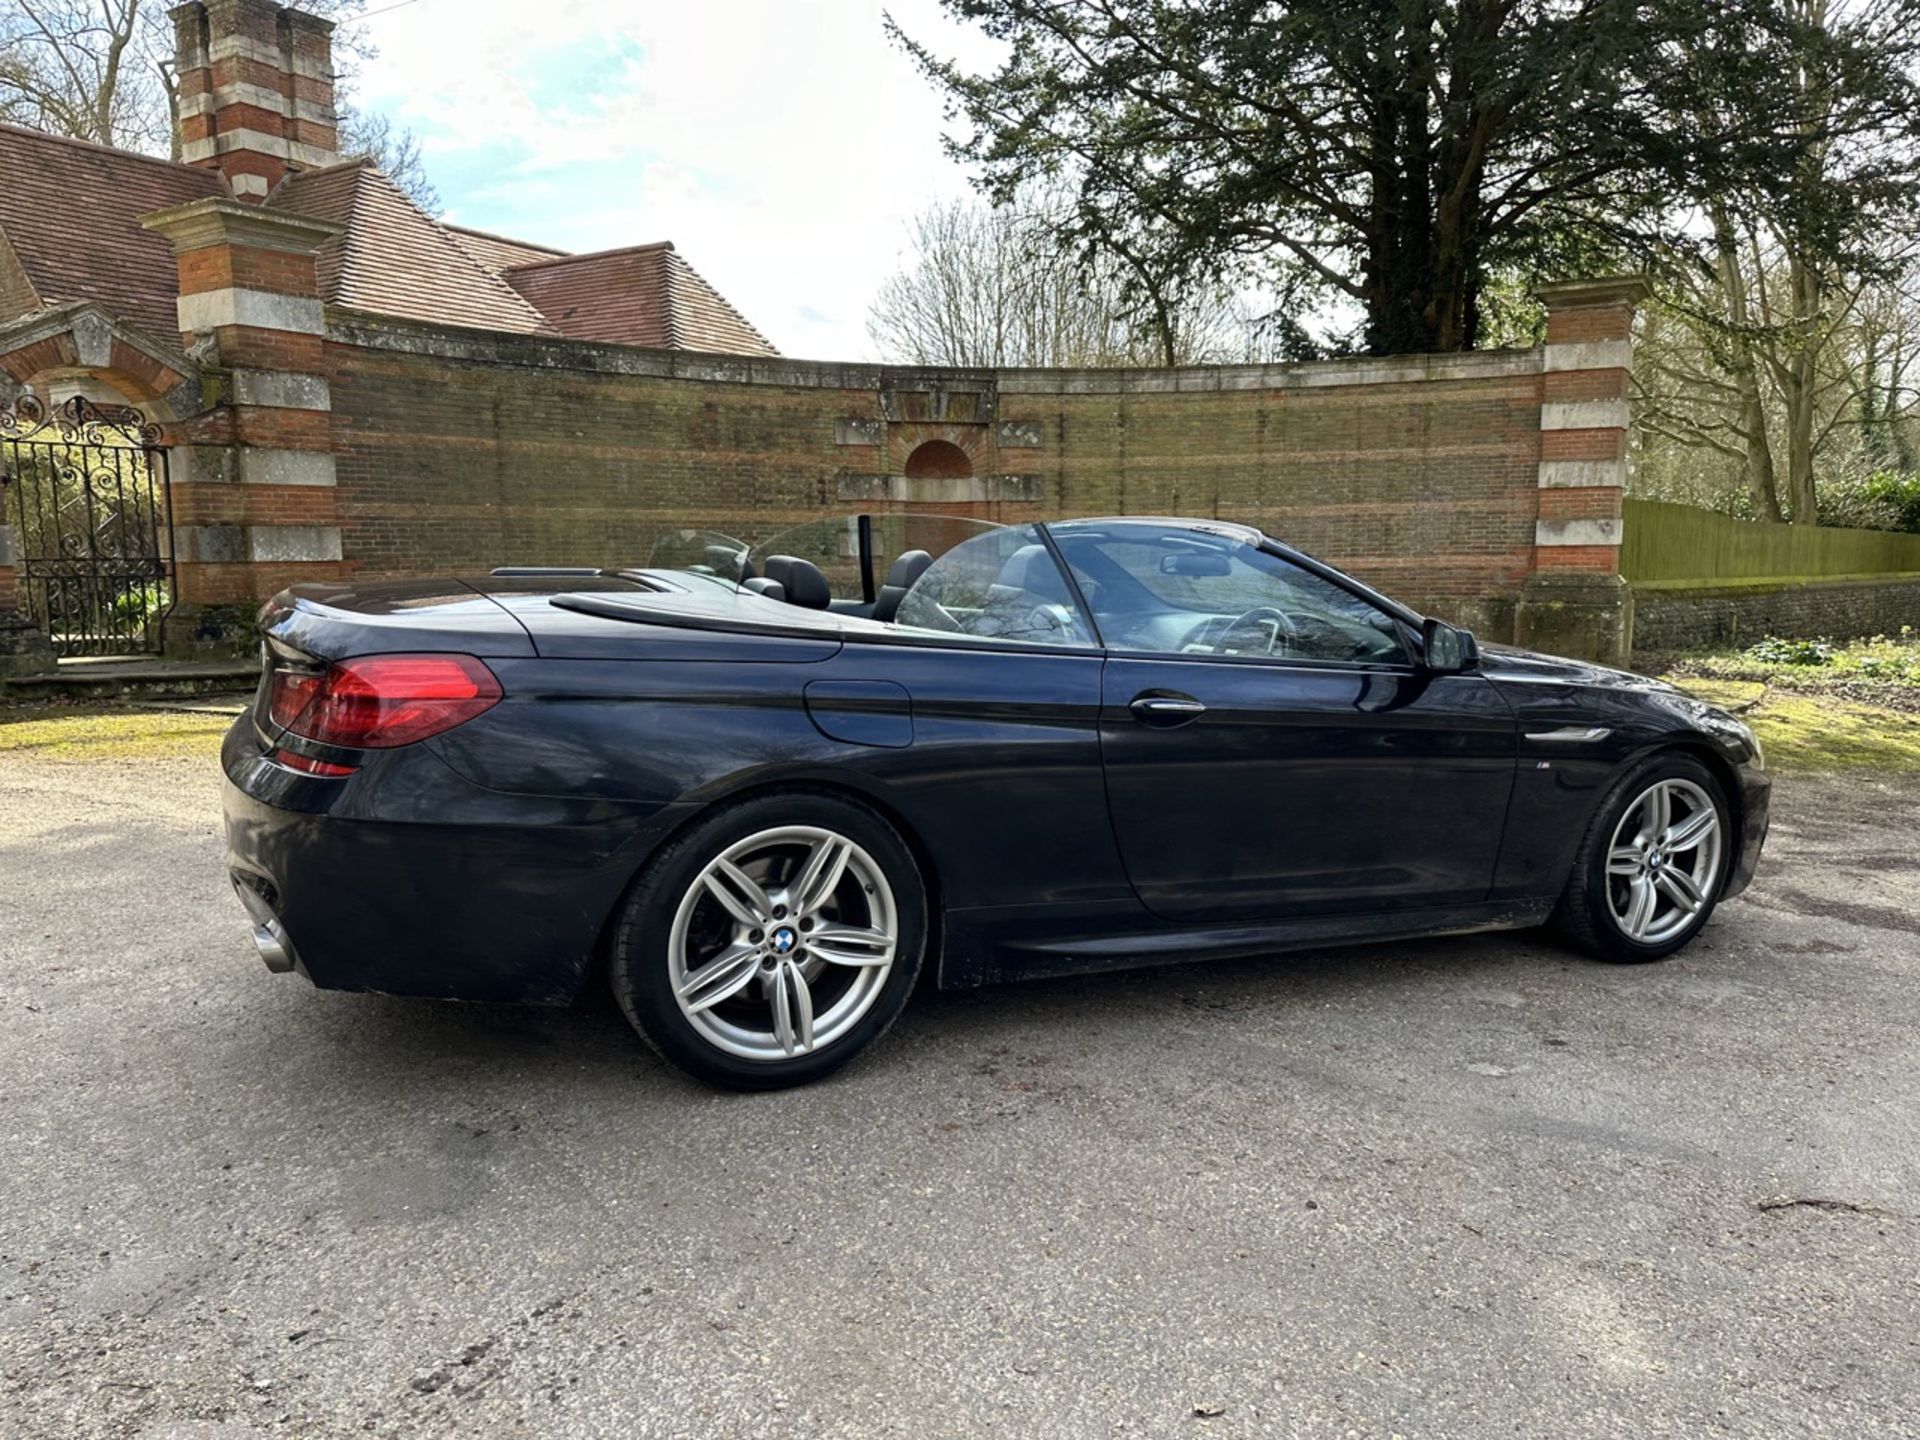 BMW 6 SERIES 640d (M SPORT) Ultimate Summer Car - AUTOMATIC - Convertible - 2014 - 3L Diesel - Image 7 of 18